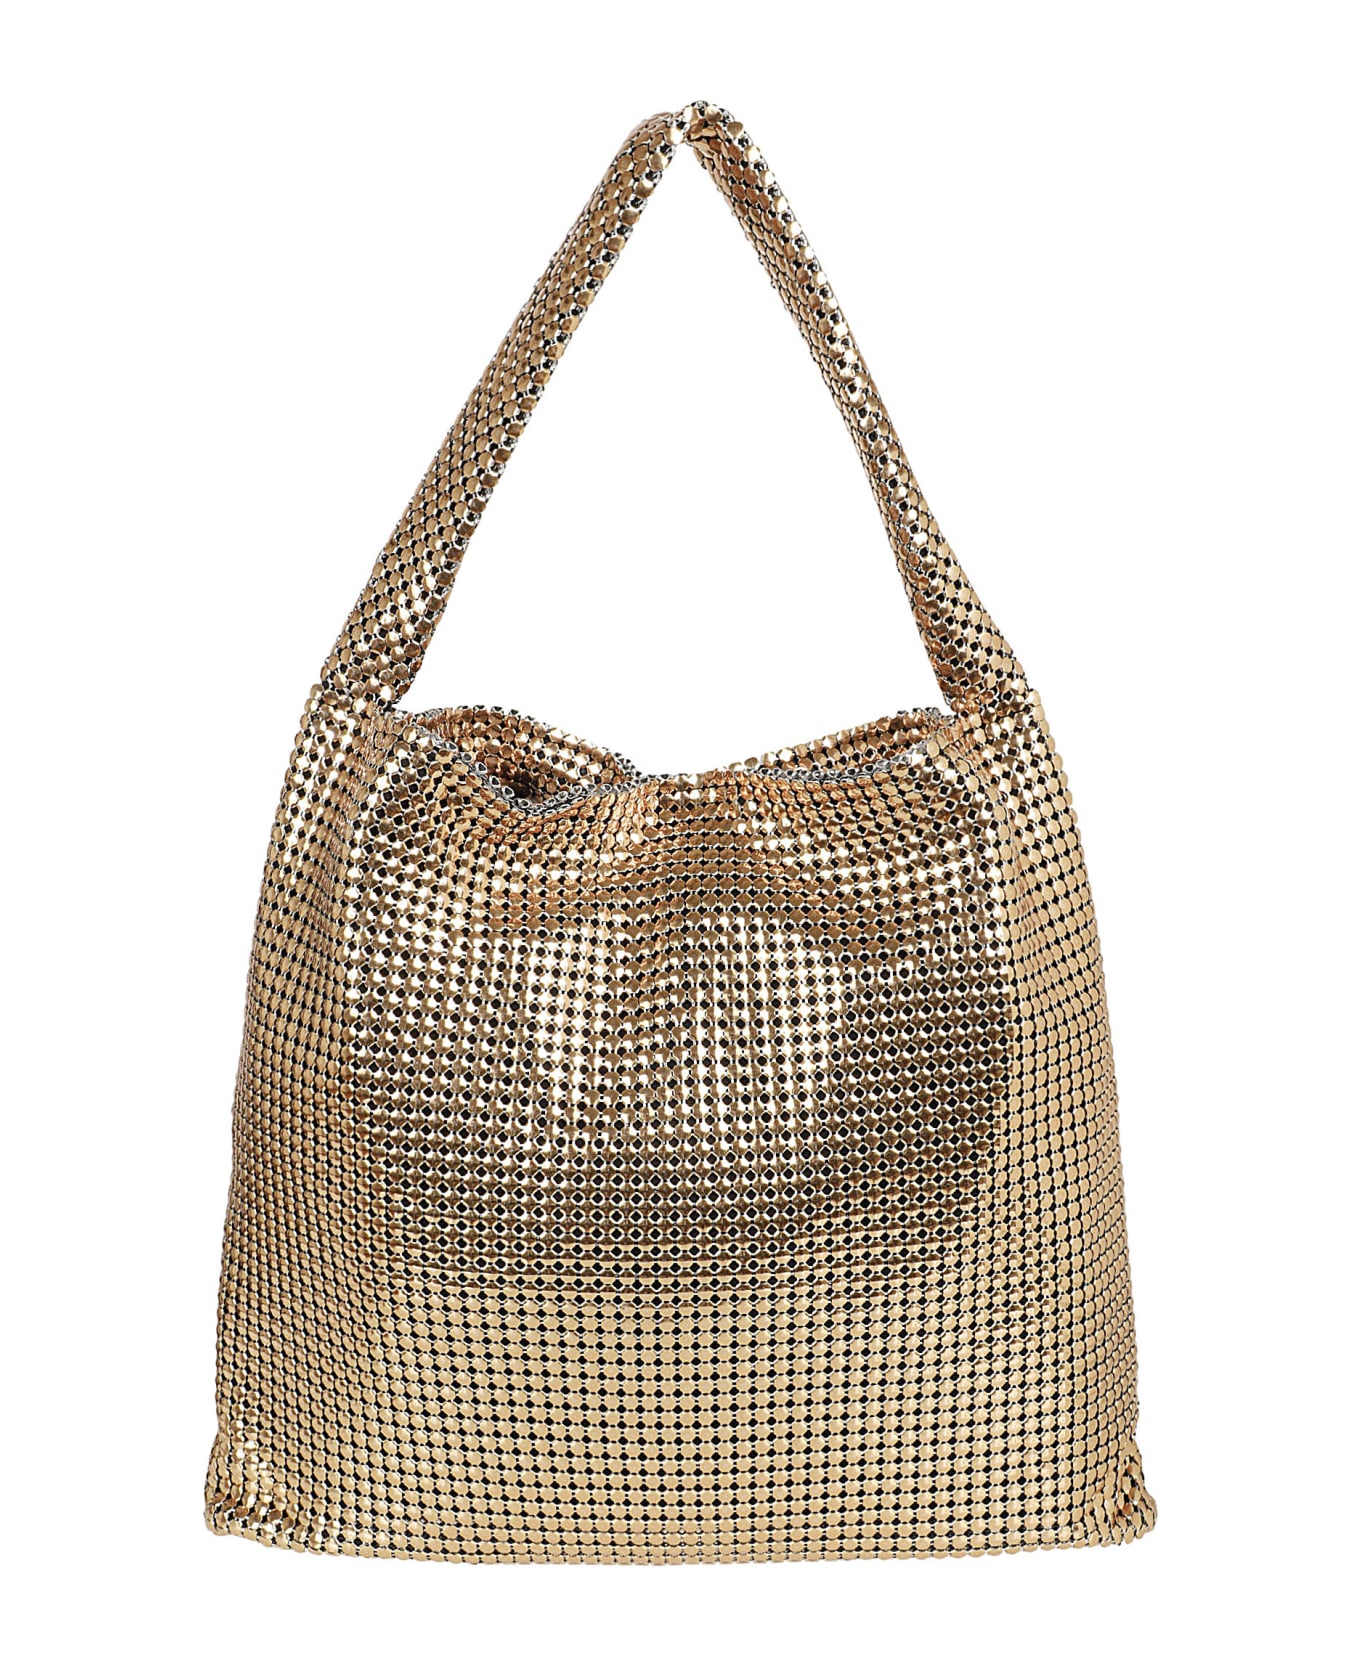 Paco Rabanne Pixel Tote - Gold トートバッグ